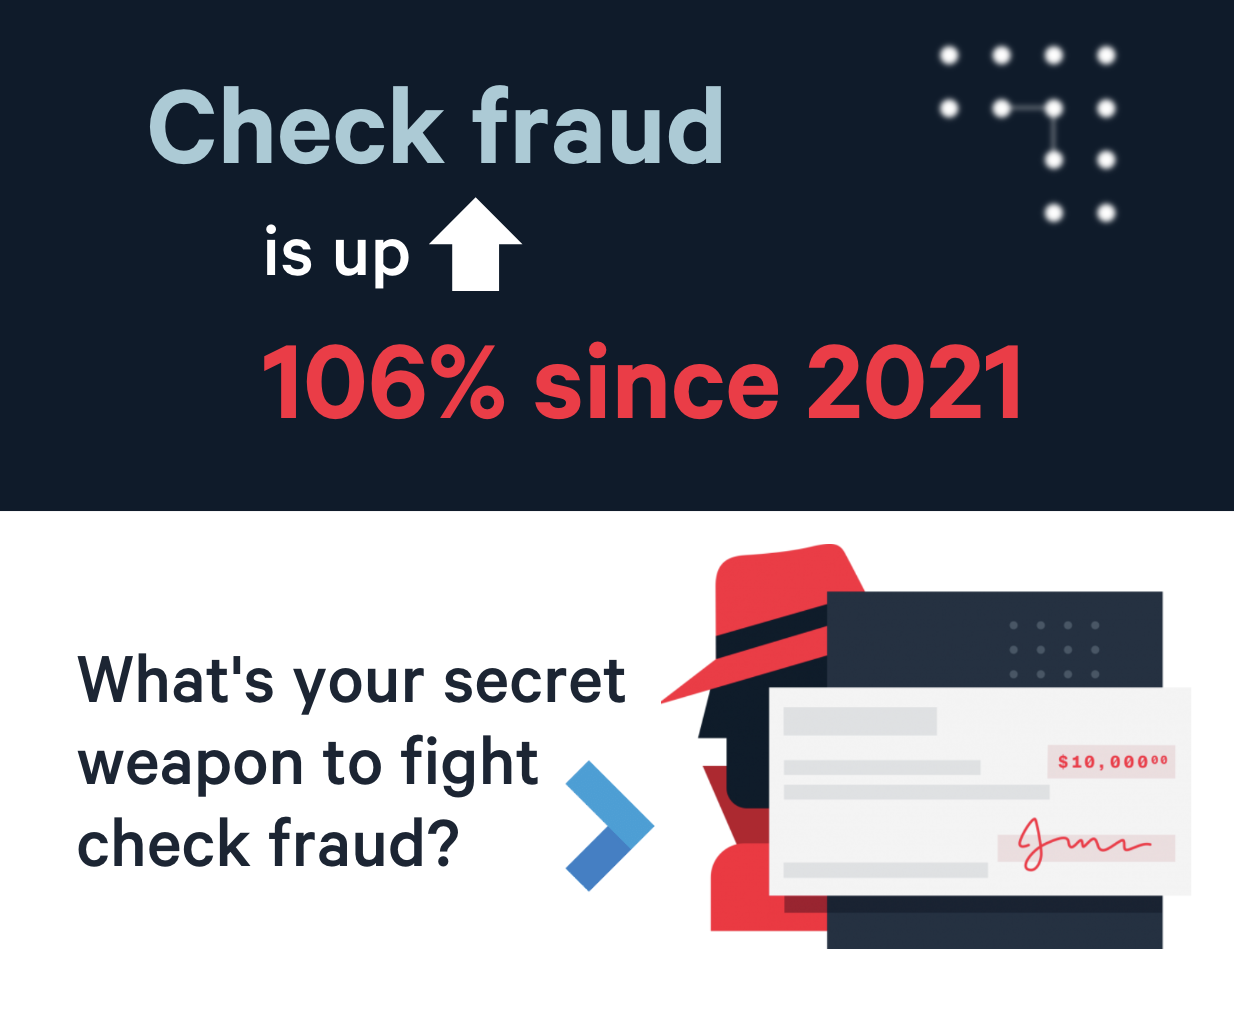 Check fraud on the rise